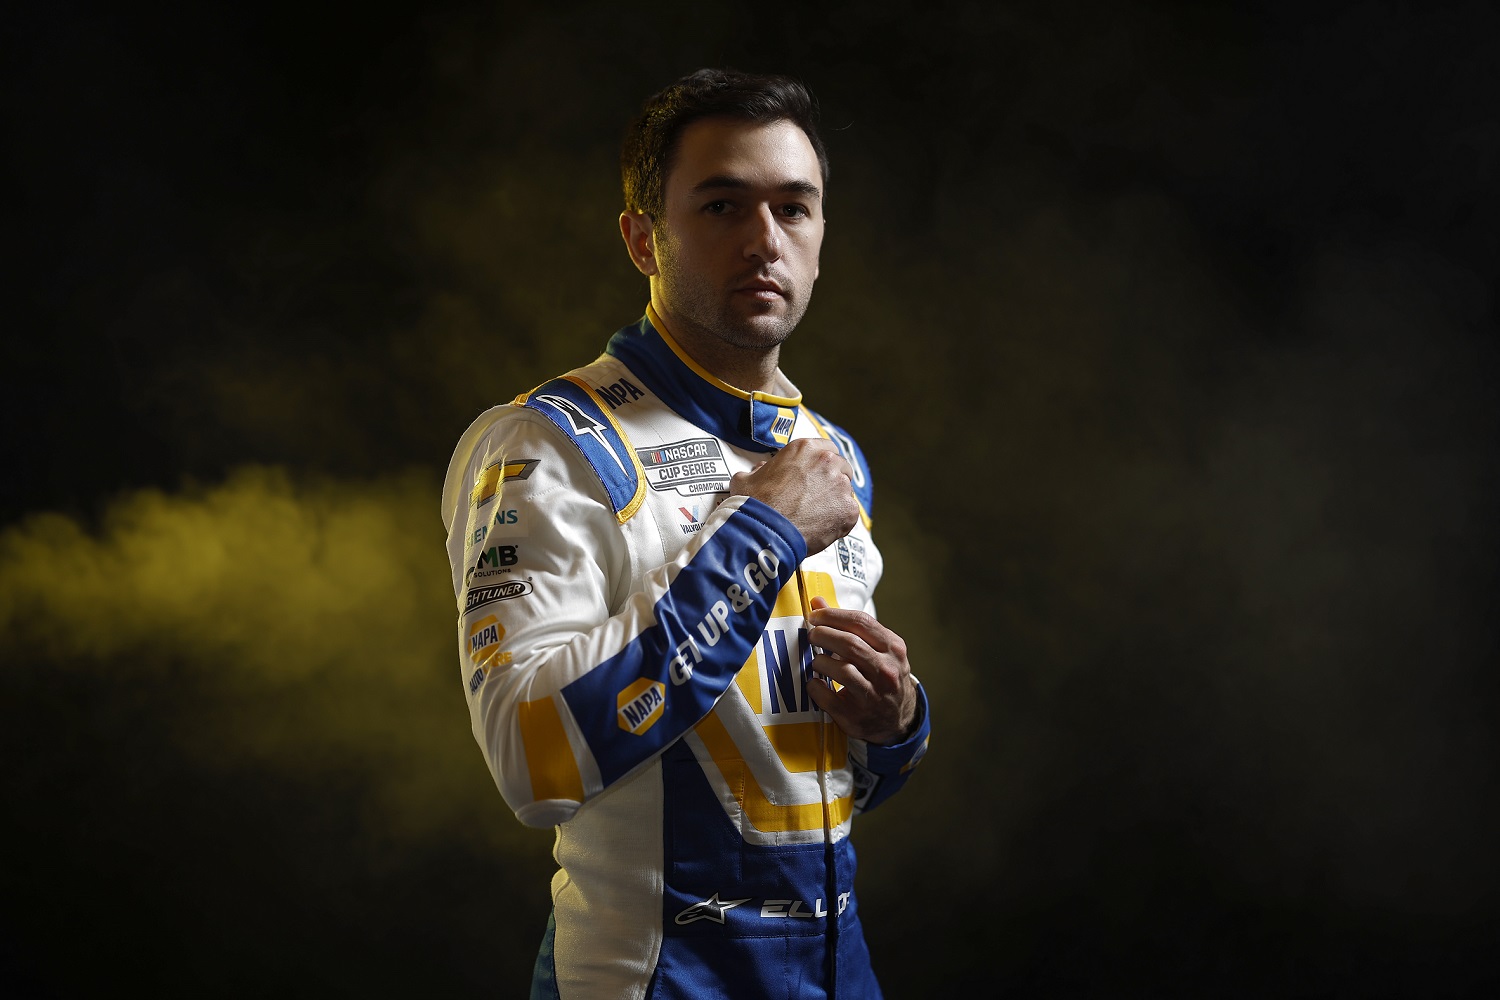 Chase Elliott poses for a photo during NASCAR Production Days at Charlotte Convention Center on Jan. 17, 2023.